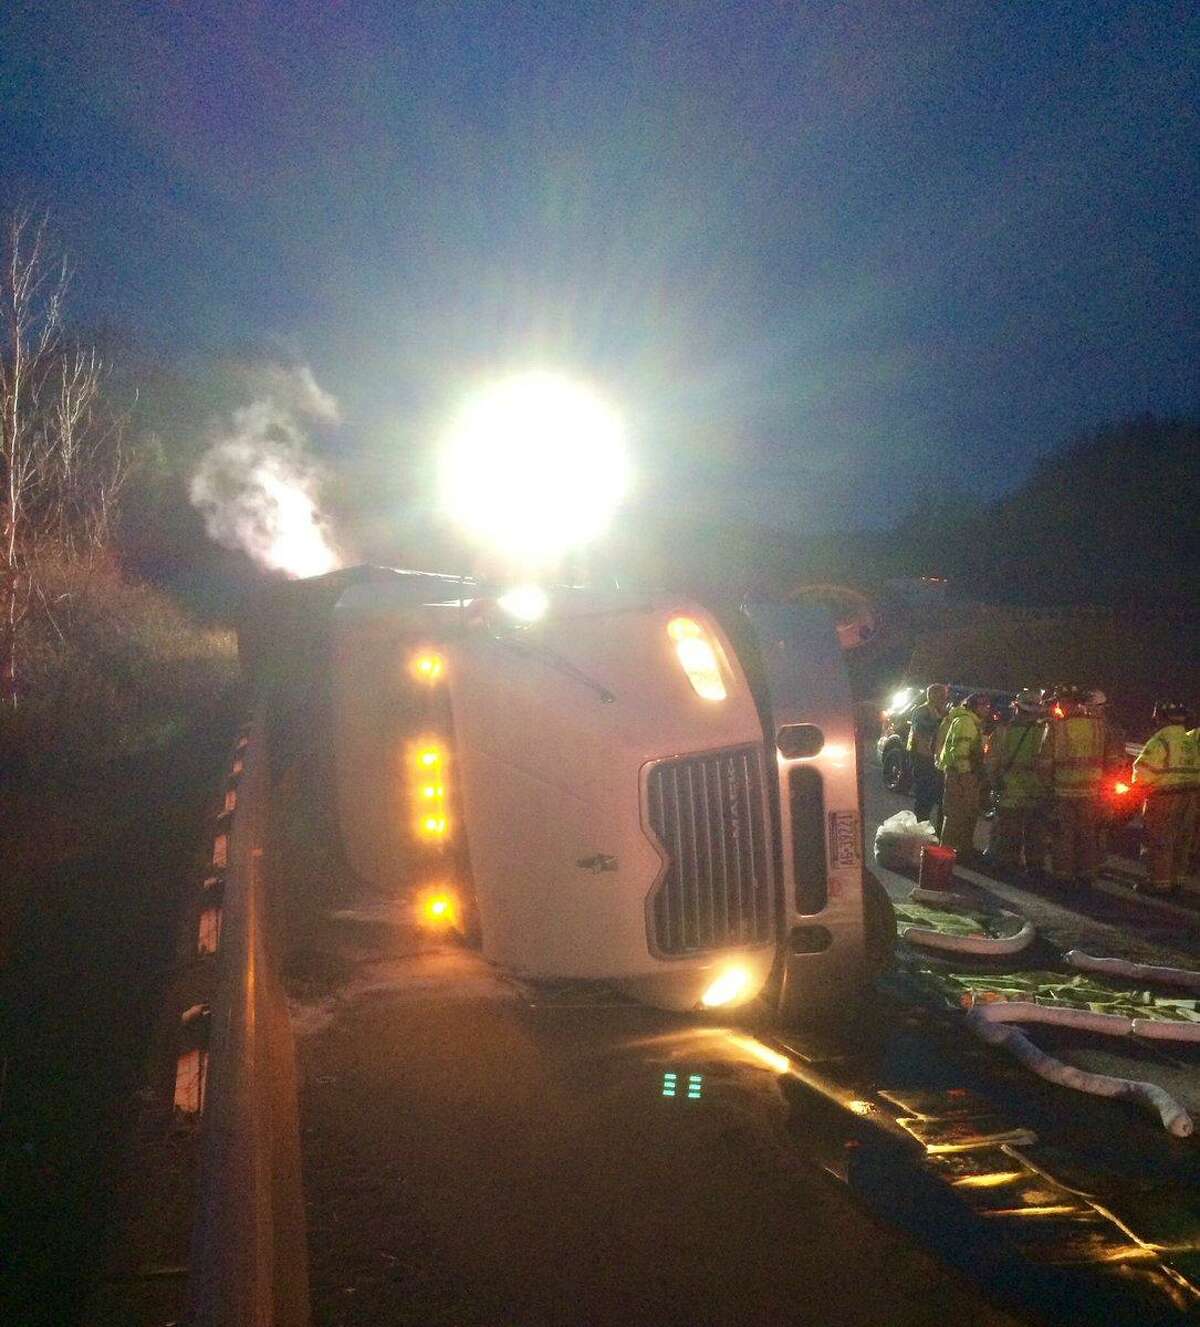 A tractor trailer containing 5,000 live chickens overturned on I-84 East around 6 a.m. Saturday morning.